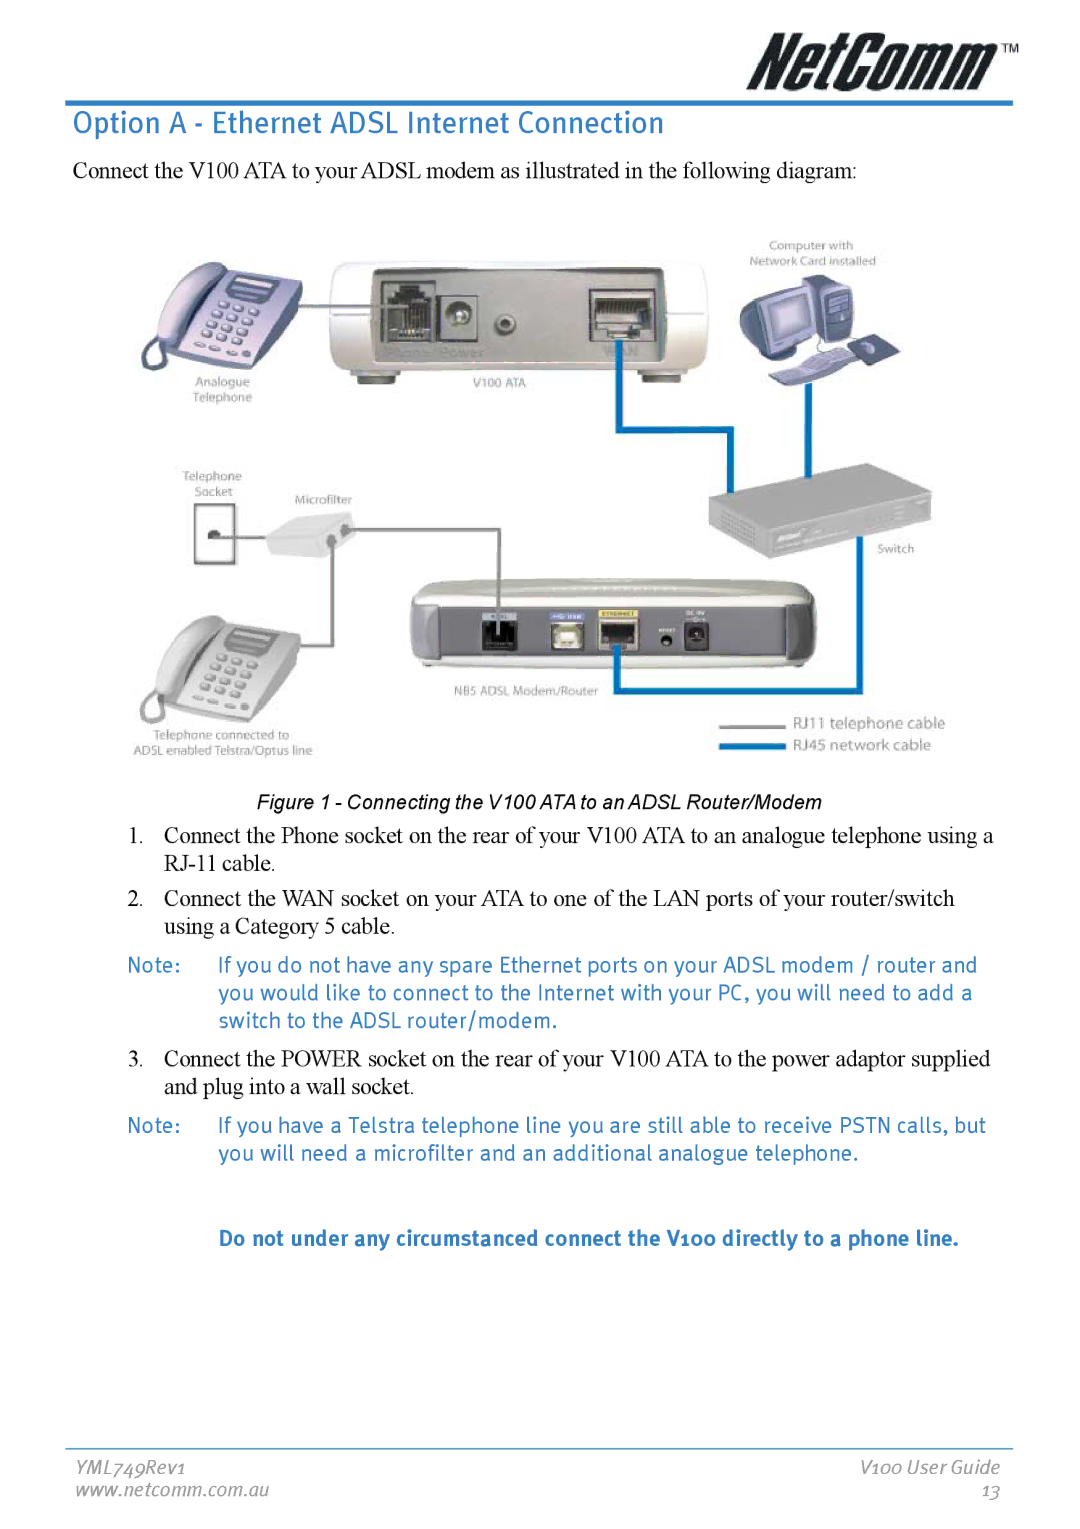 NetComm manual Option a Ethernet Adsl Internet Connection, Connecting the V100 ATA to an Adsl Router/Modem 